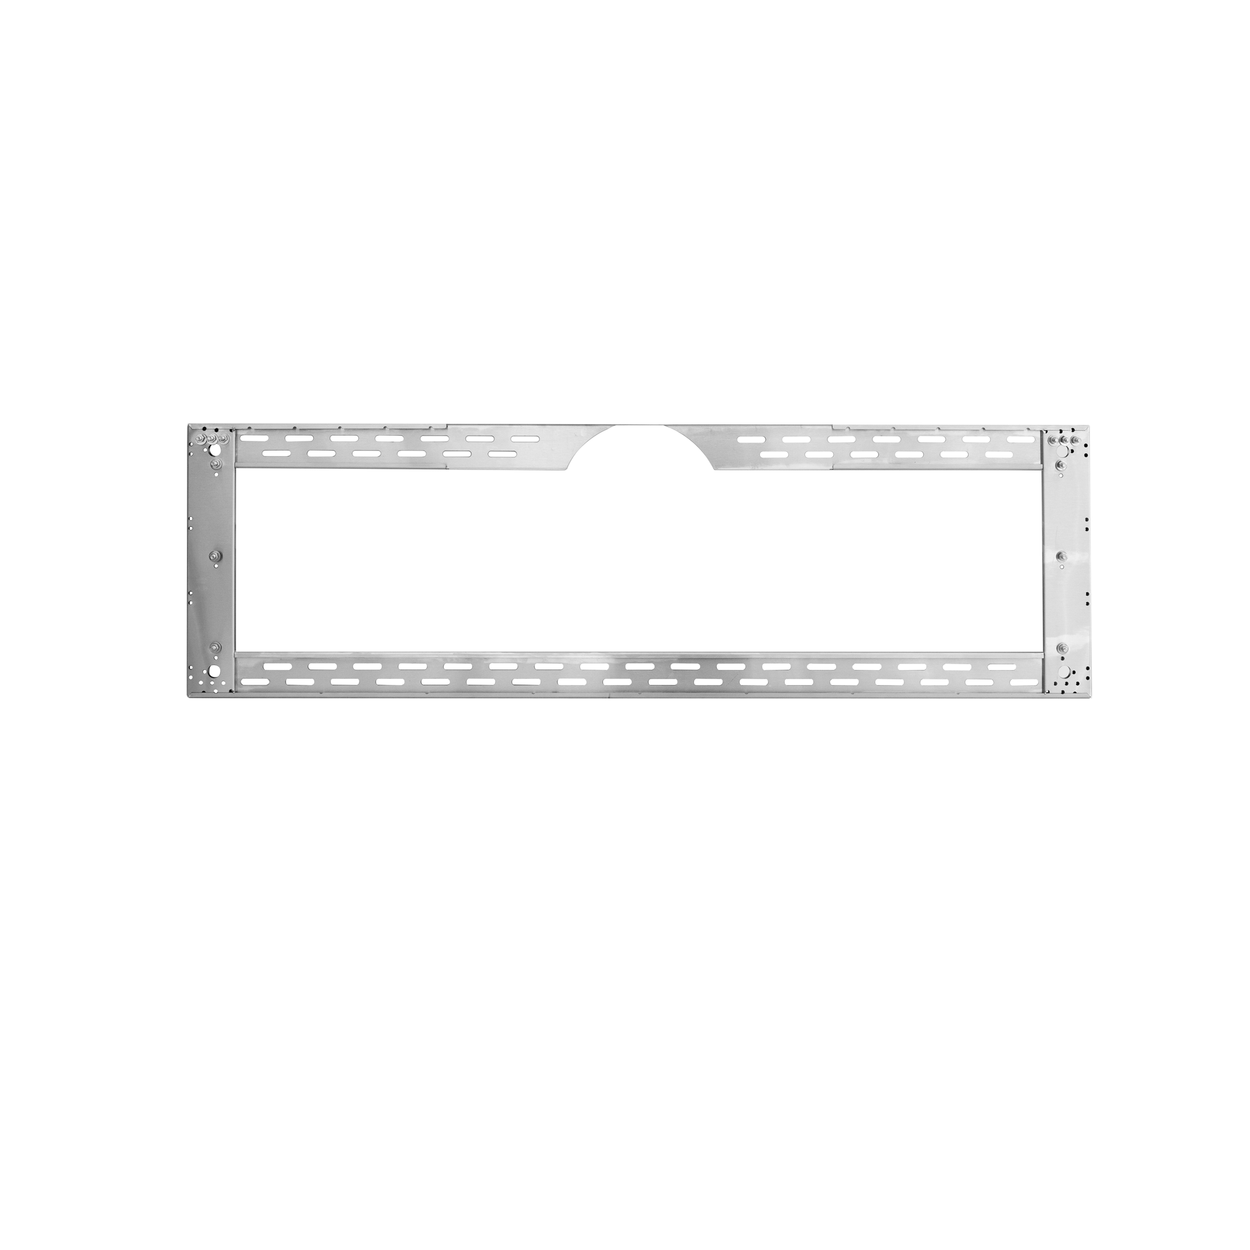 60" Vent Hood Spacer Template